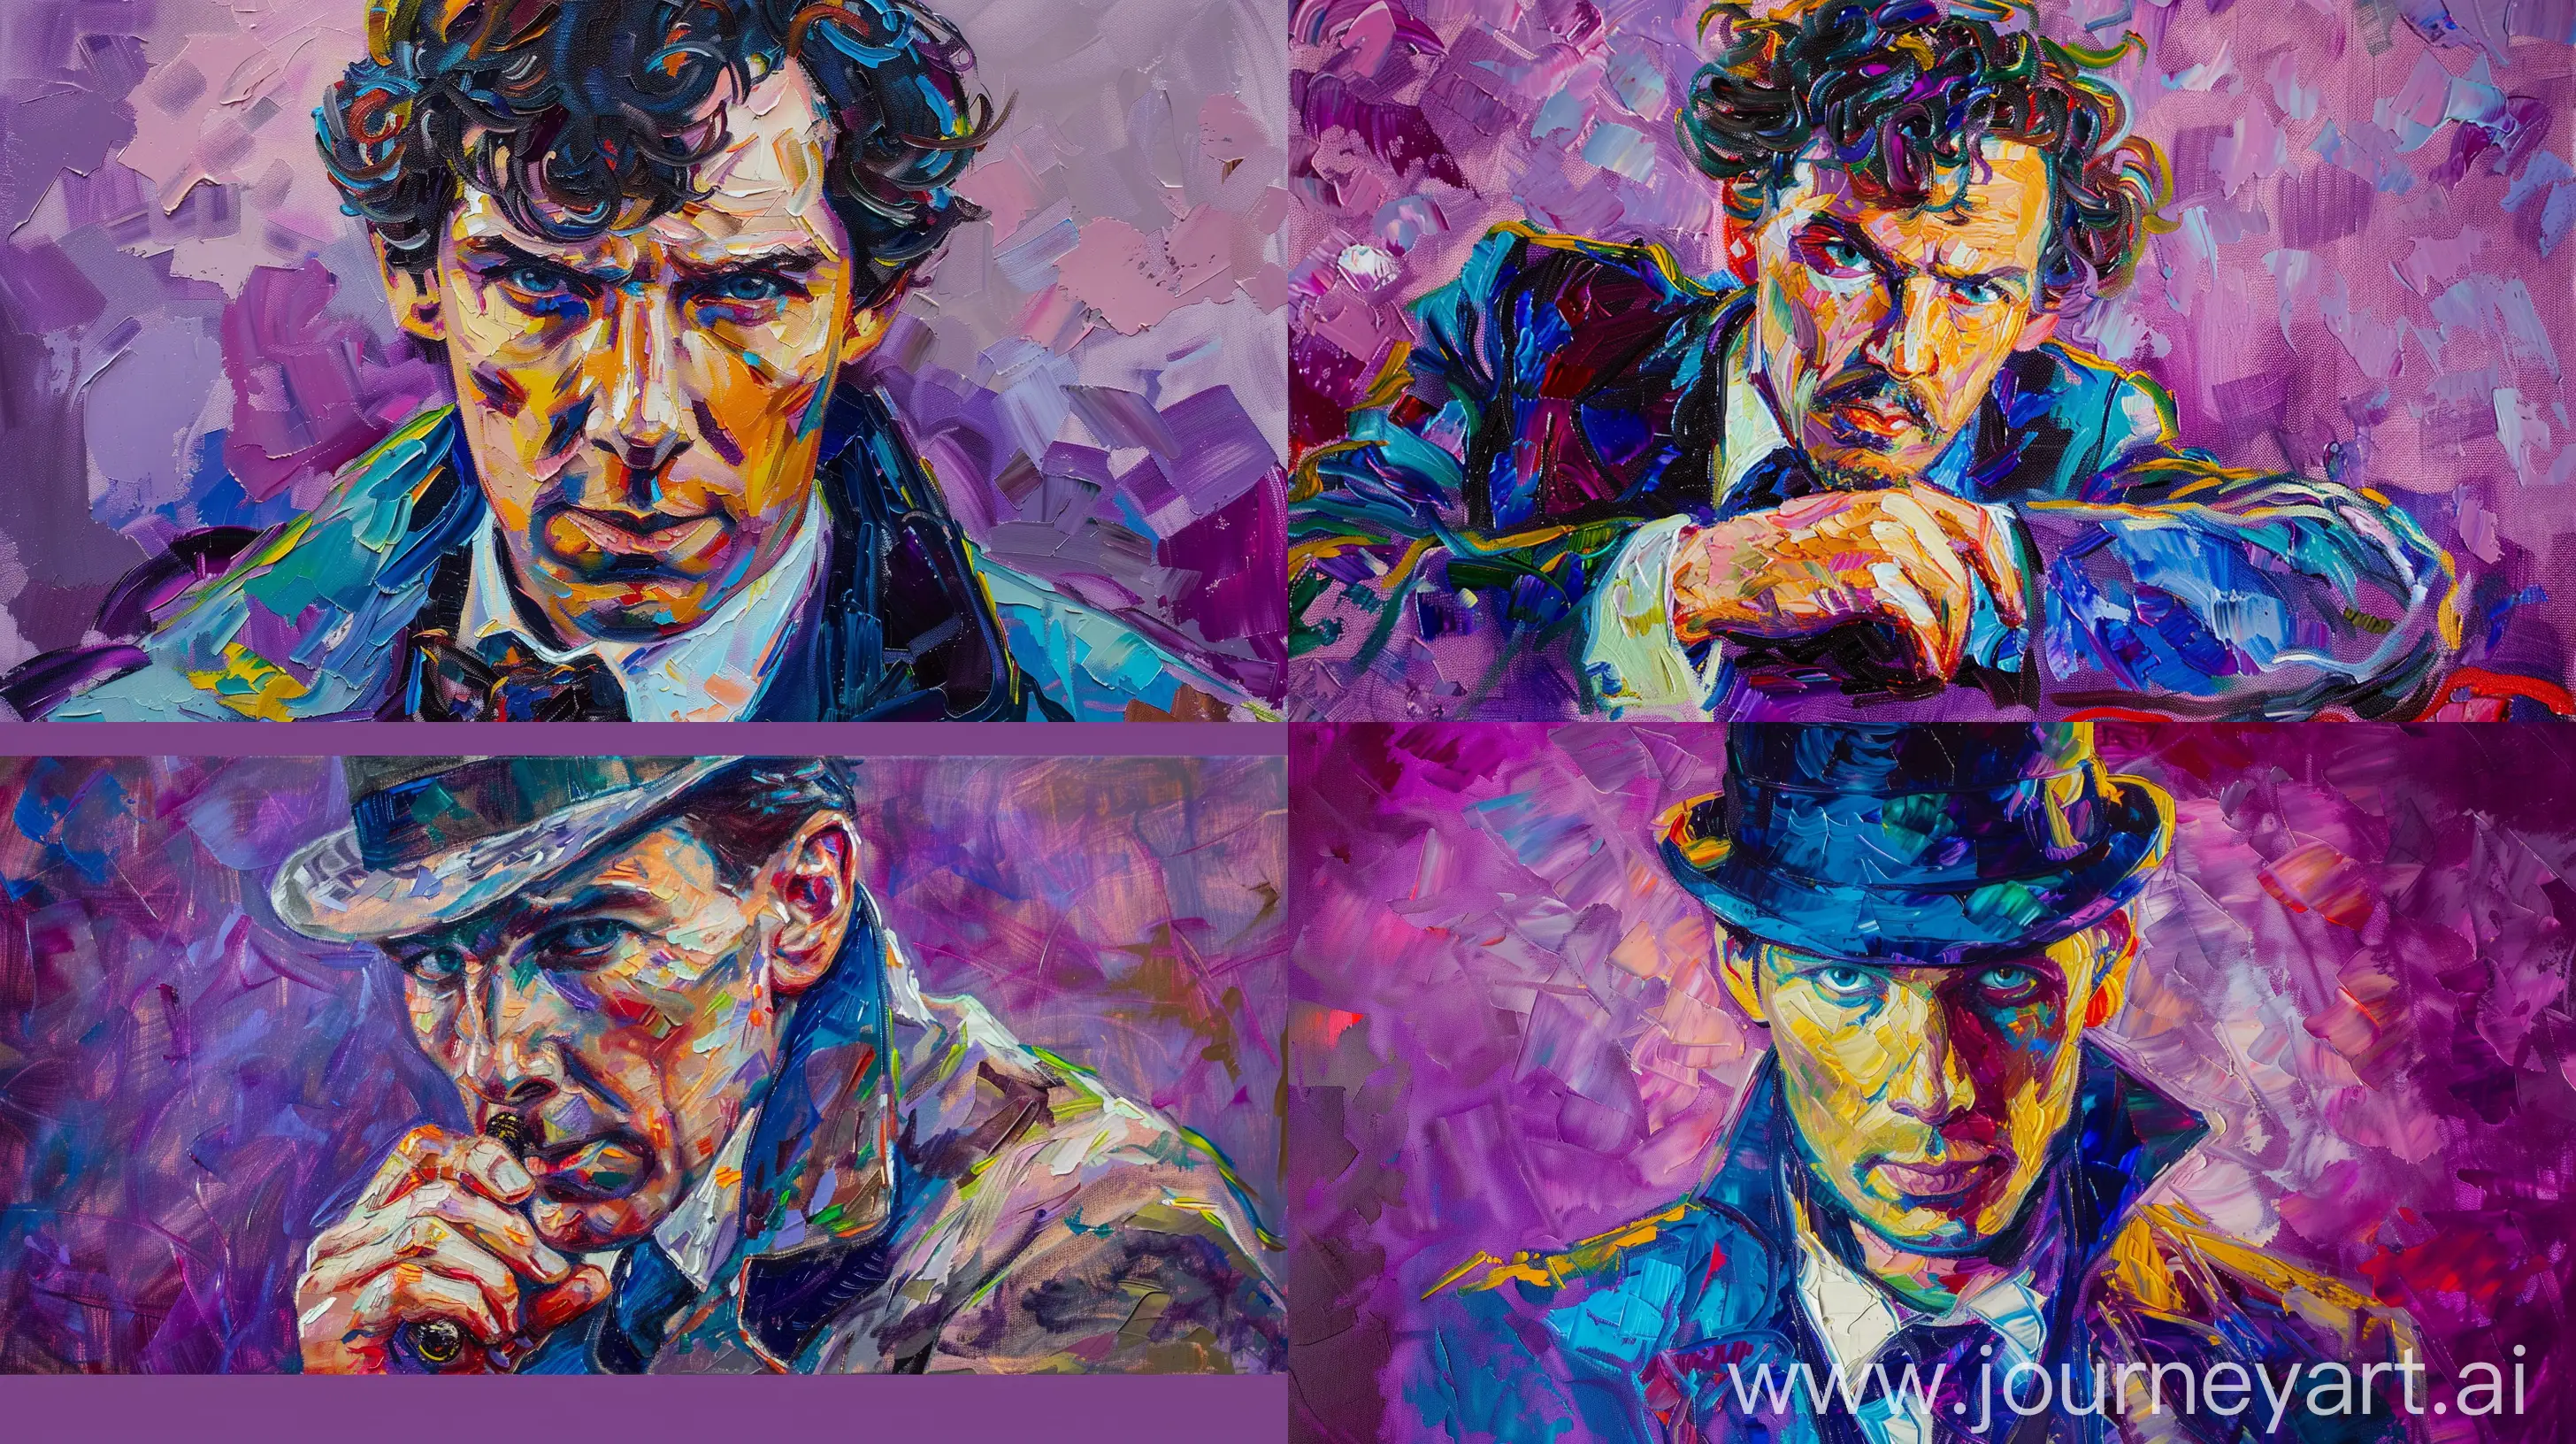 Sherlock-Holmes-Oil-Painting-in-Van-Gogh-Style-Vibrant-Pastel-Colors-on-Purple-Background